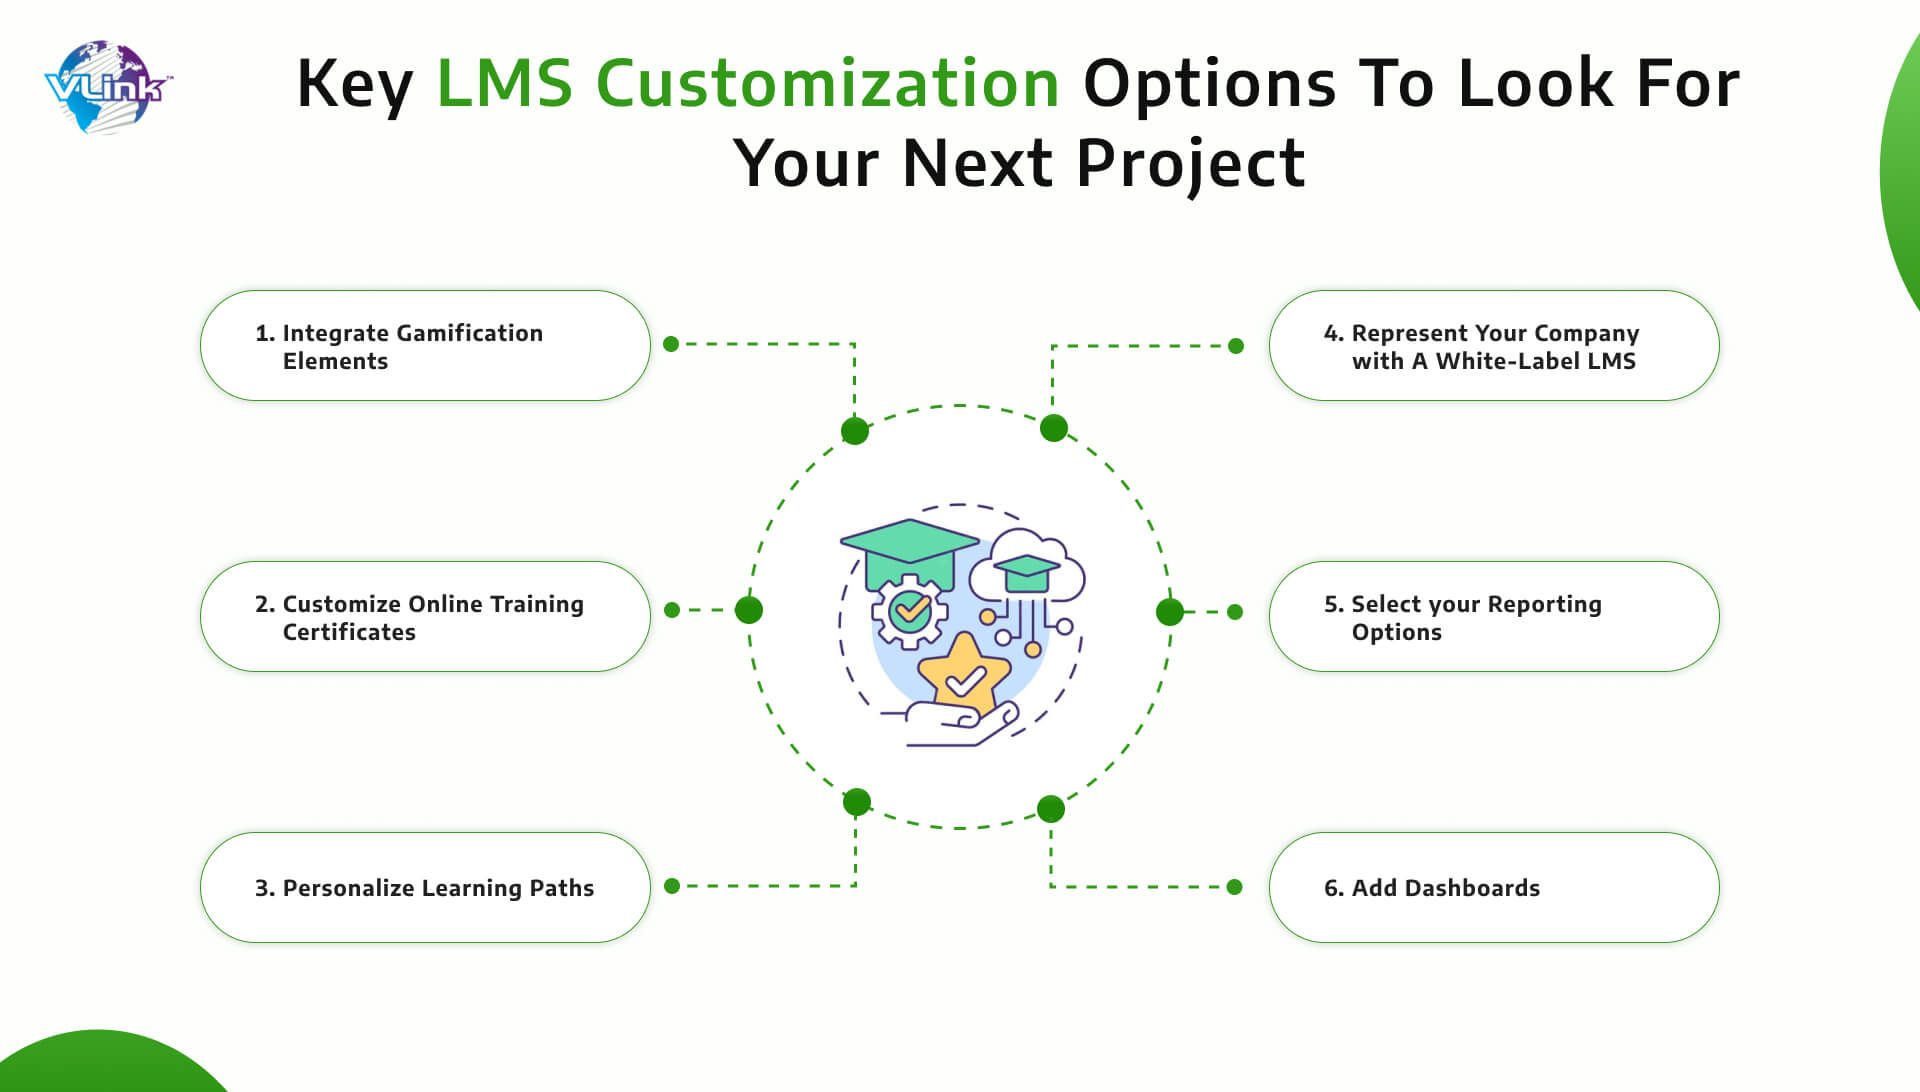 Key LMS Customization Options to Look for Your Next Project